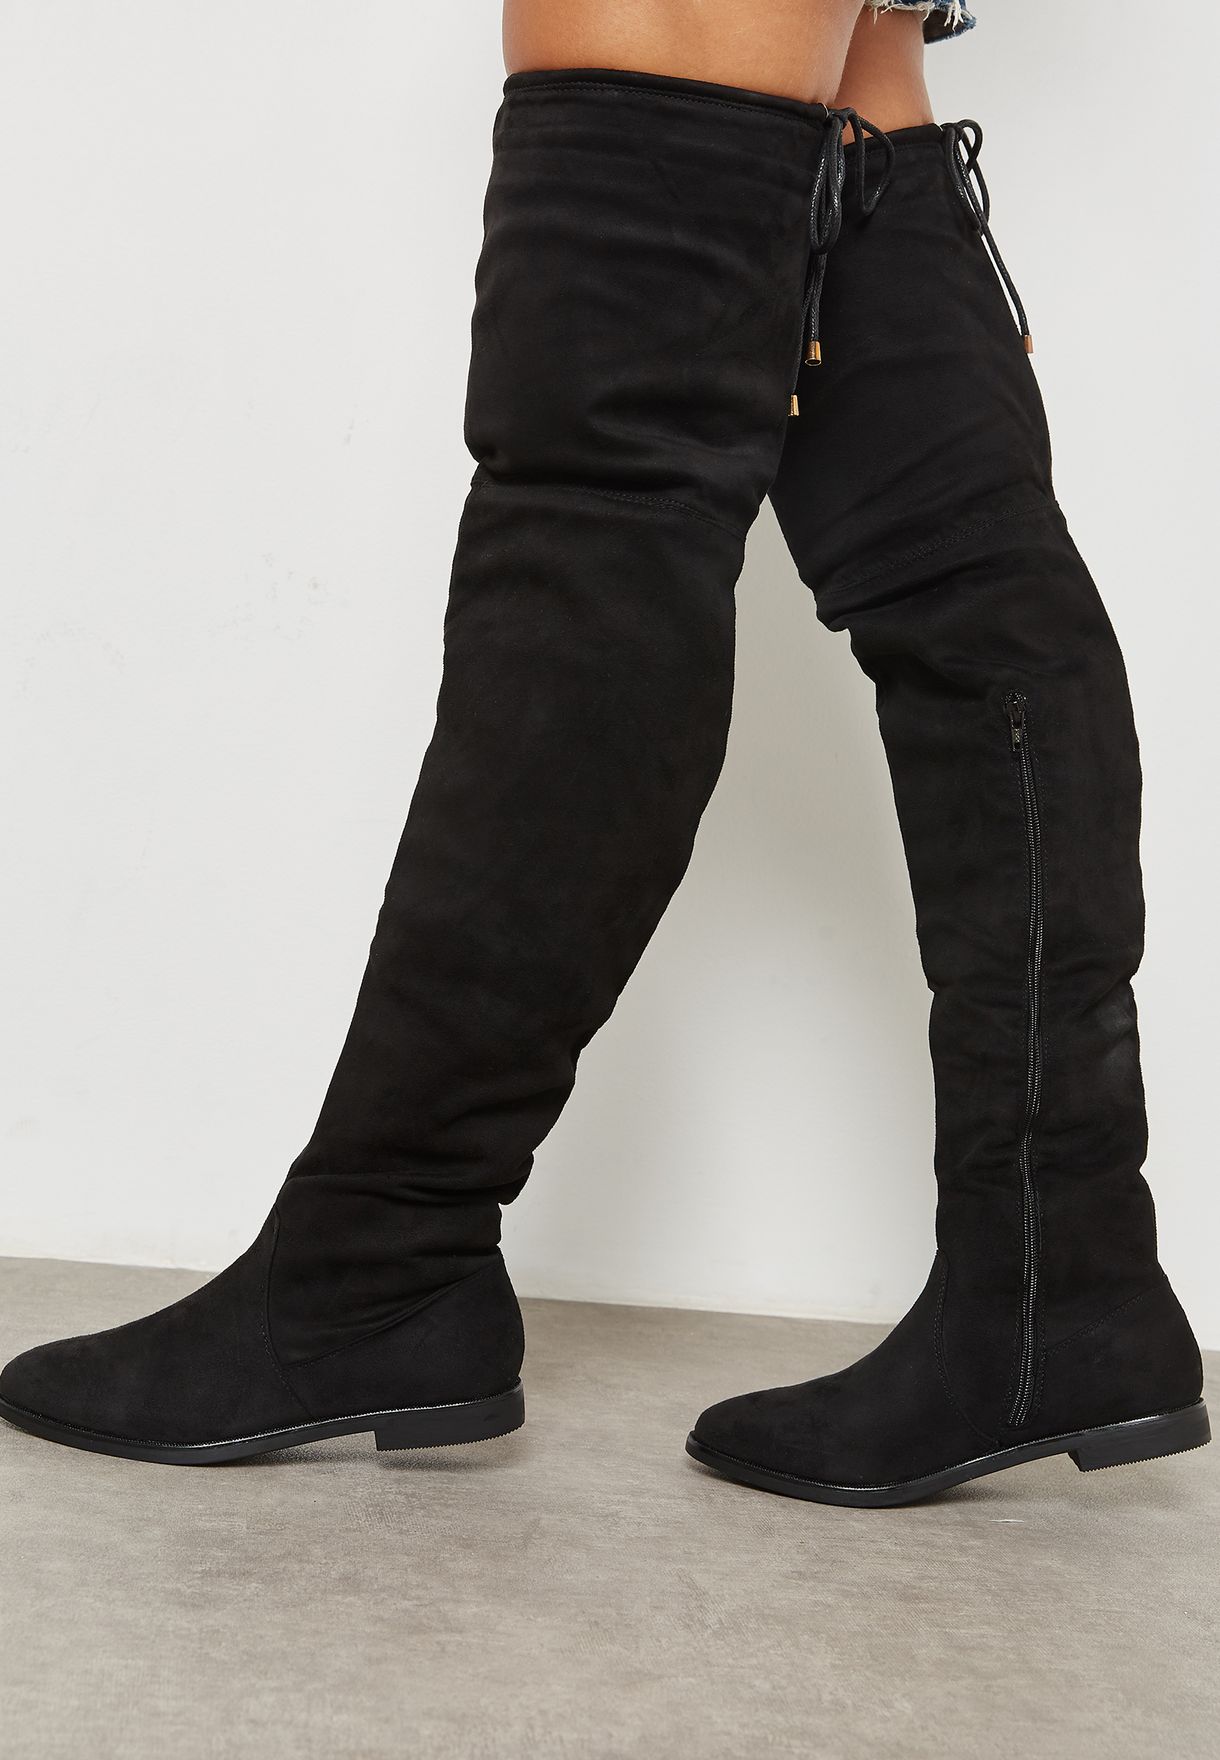 truffle over the knee boots